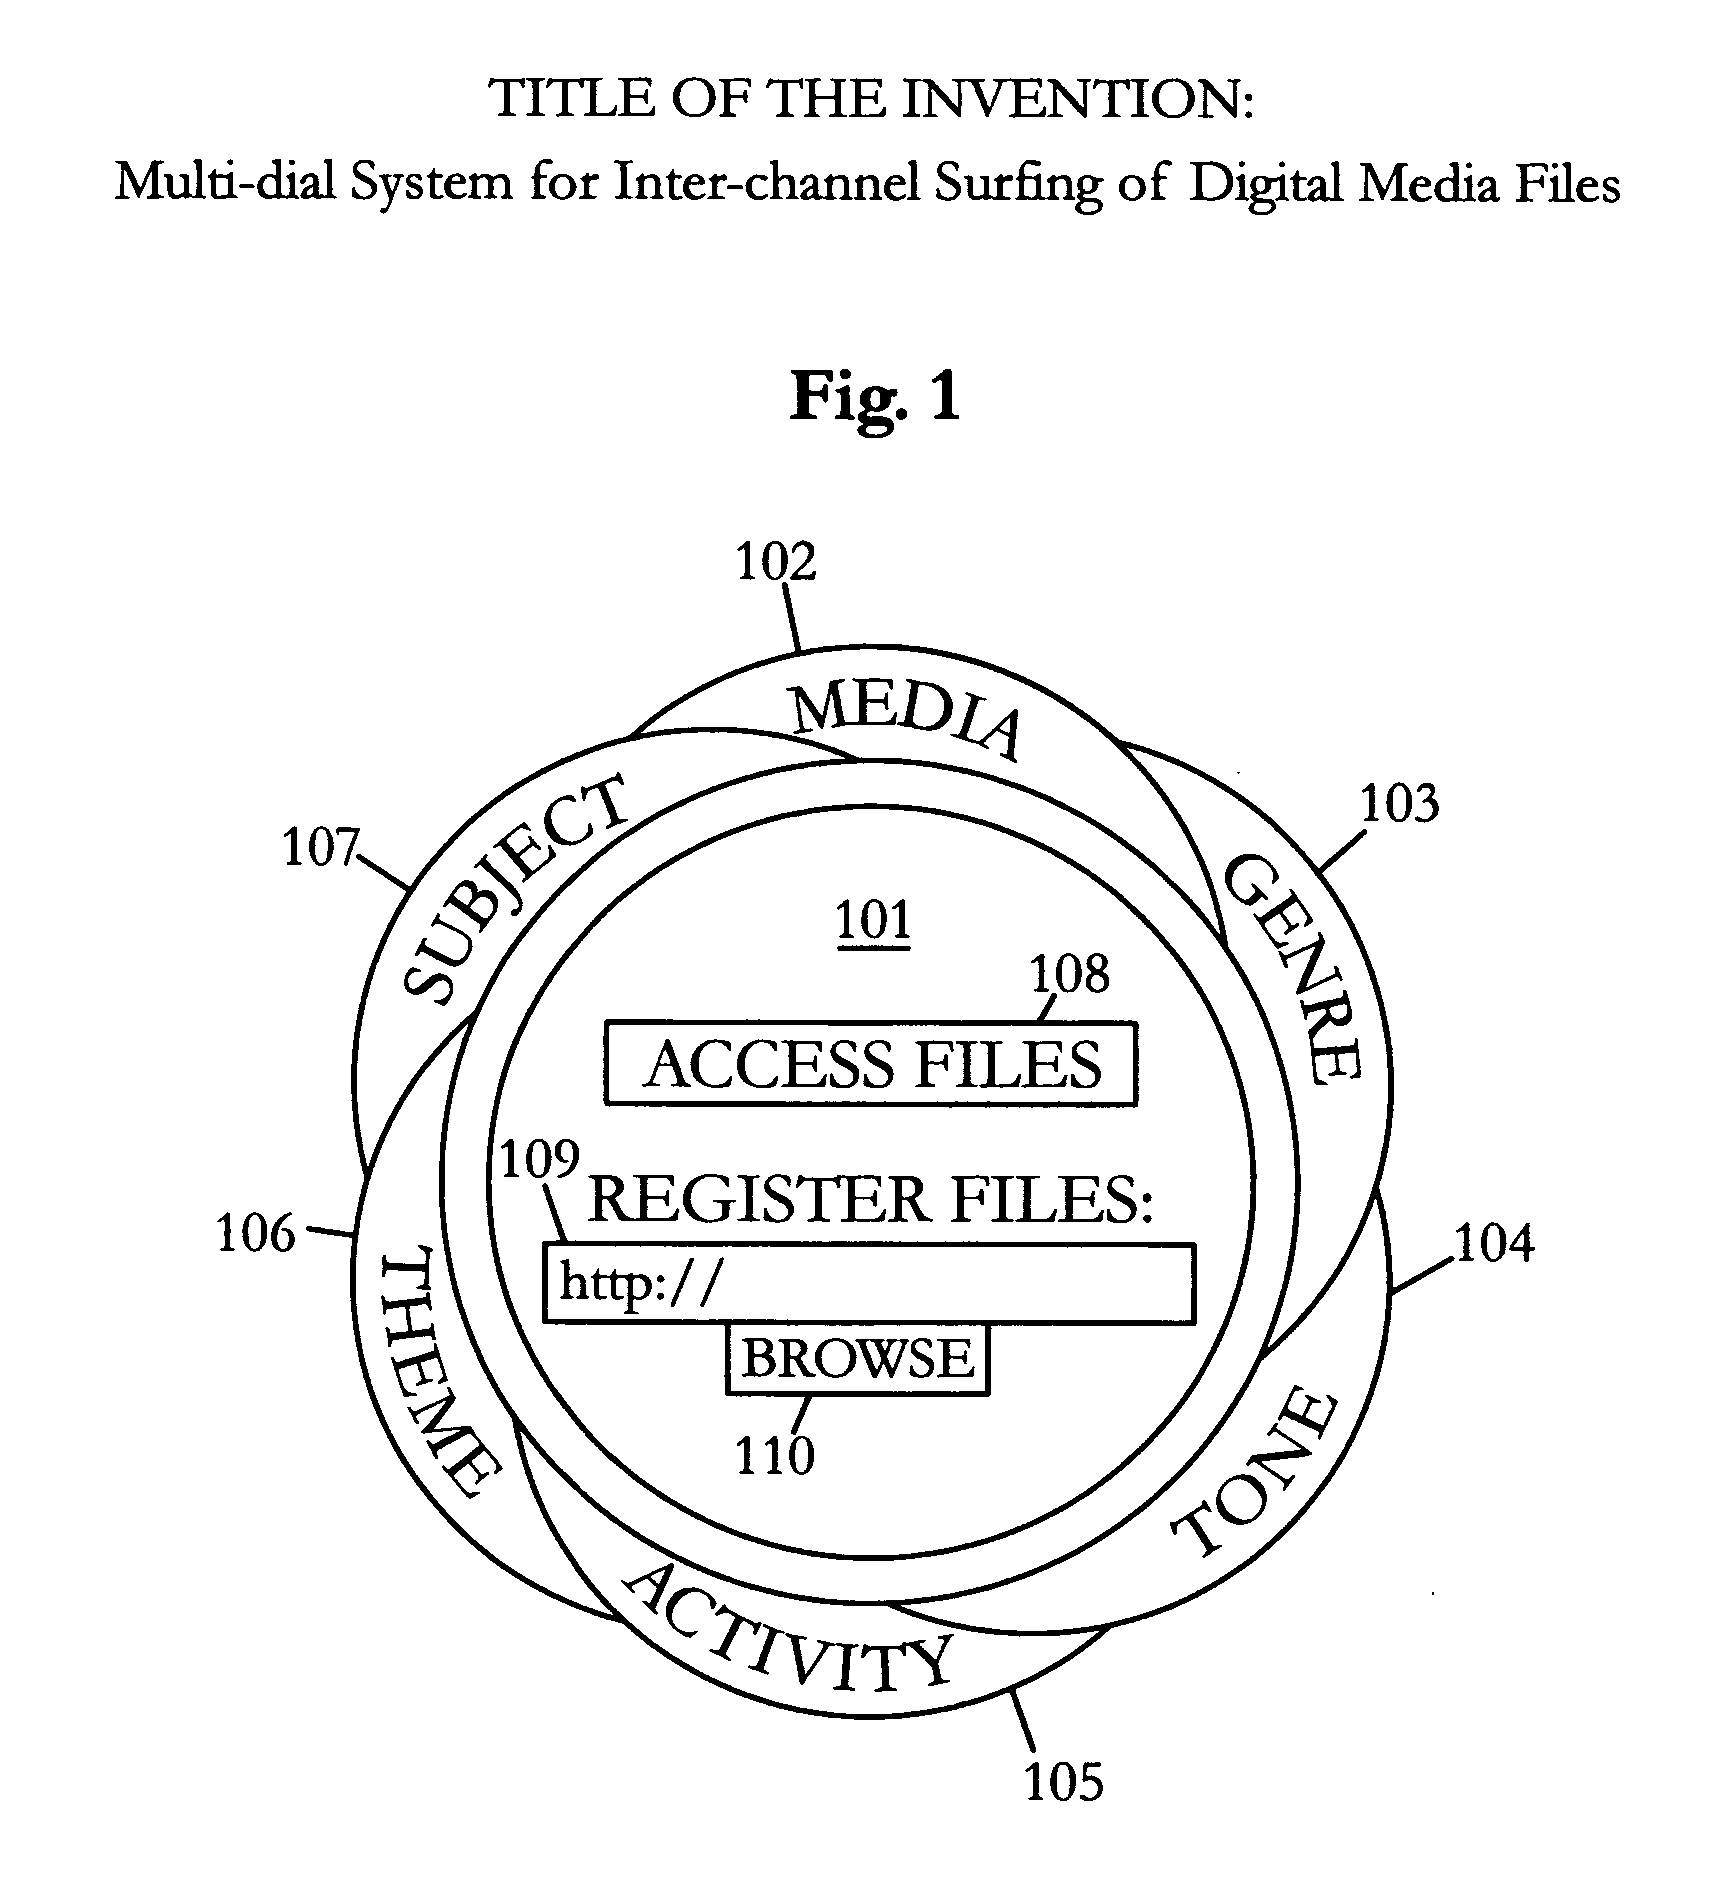 Multi-dial system for inter-channel surfing of digital media files